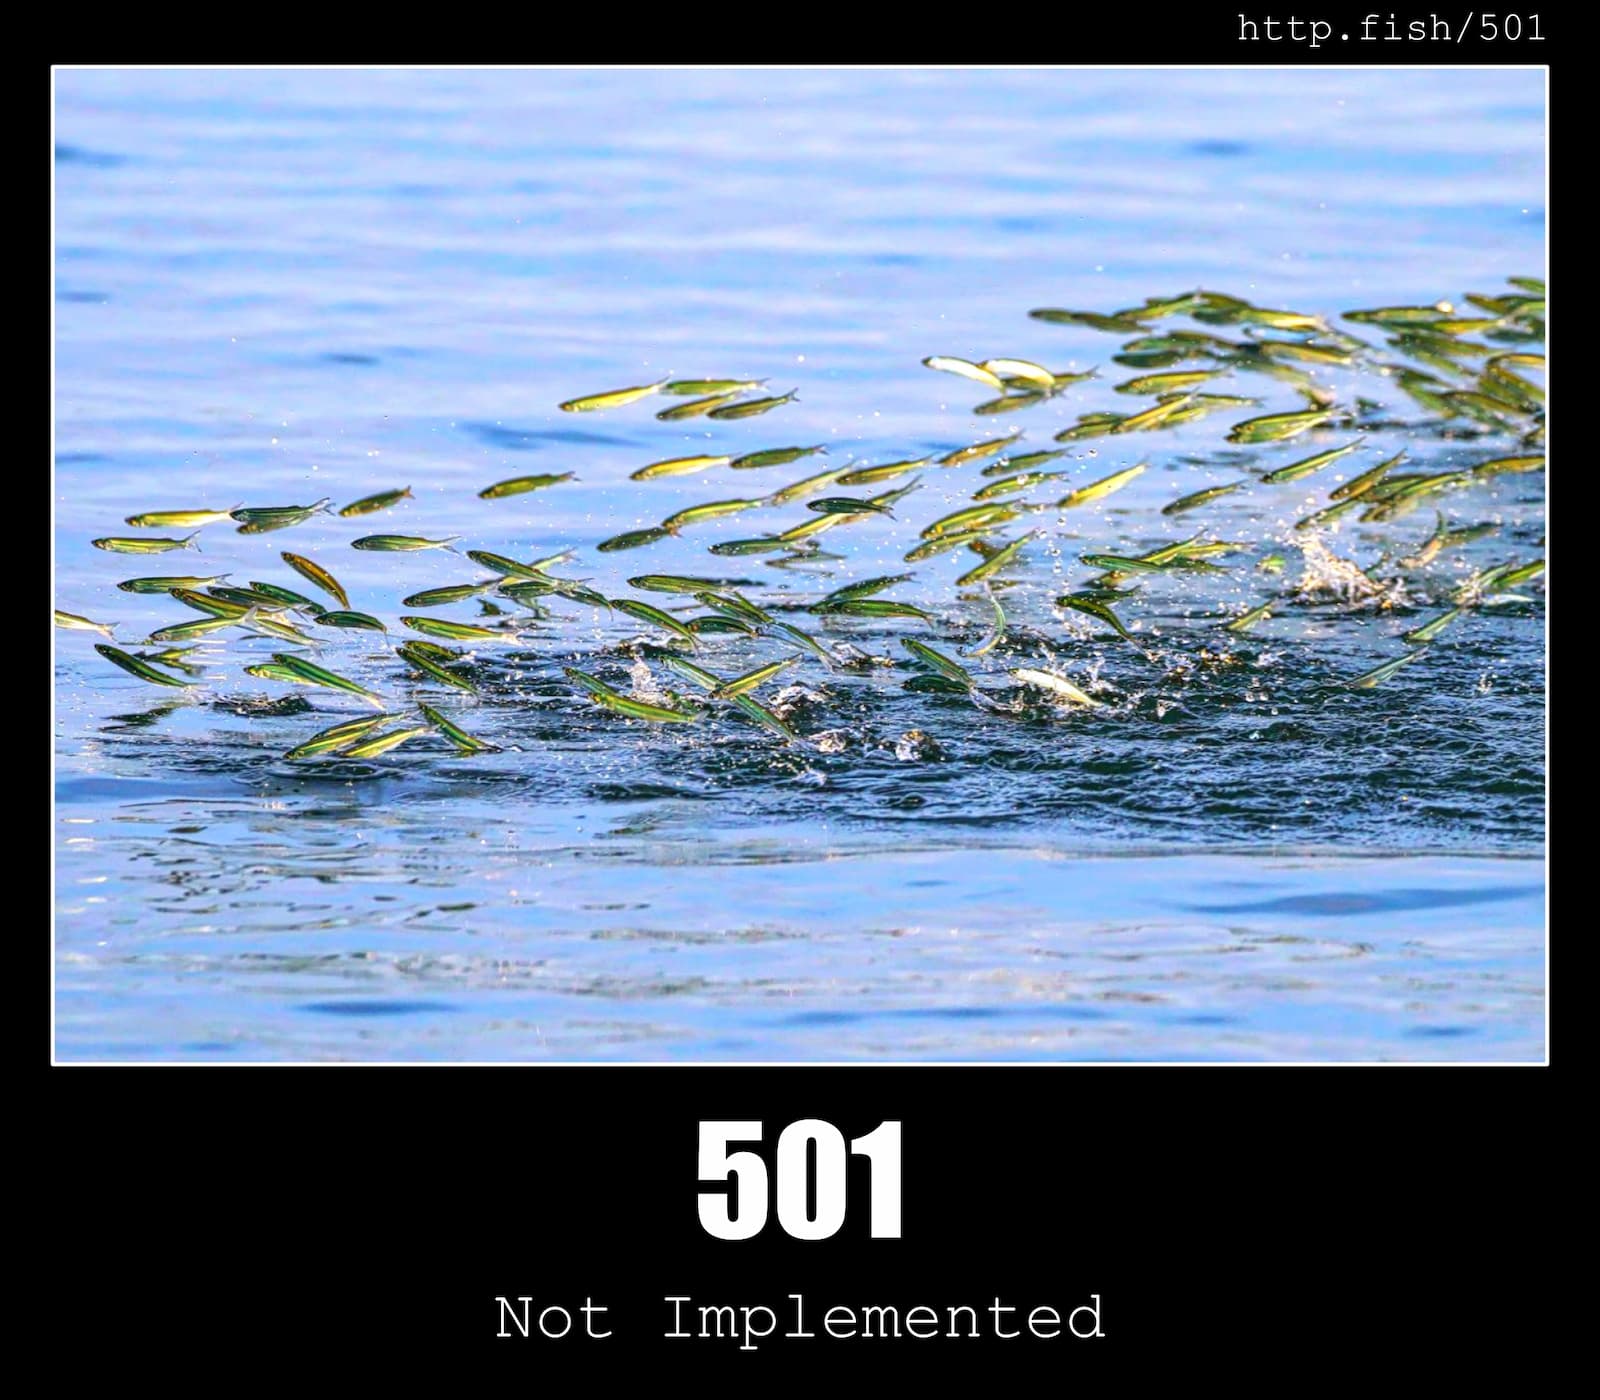 HTTP Status Code 501 Not Implemented & Fish